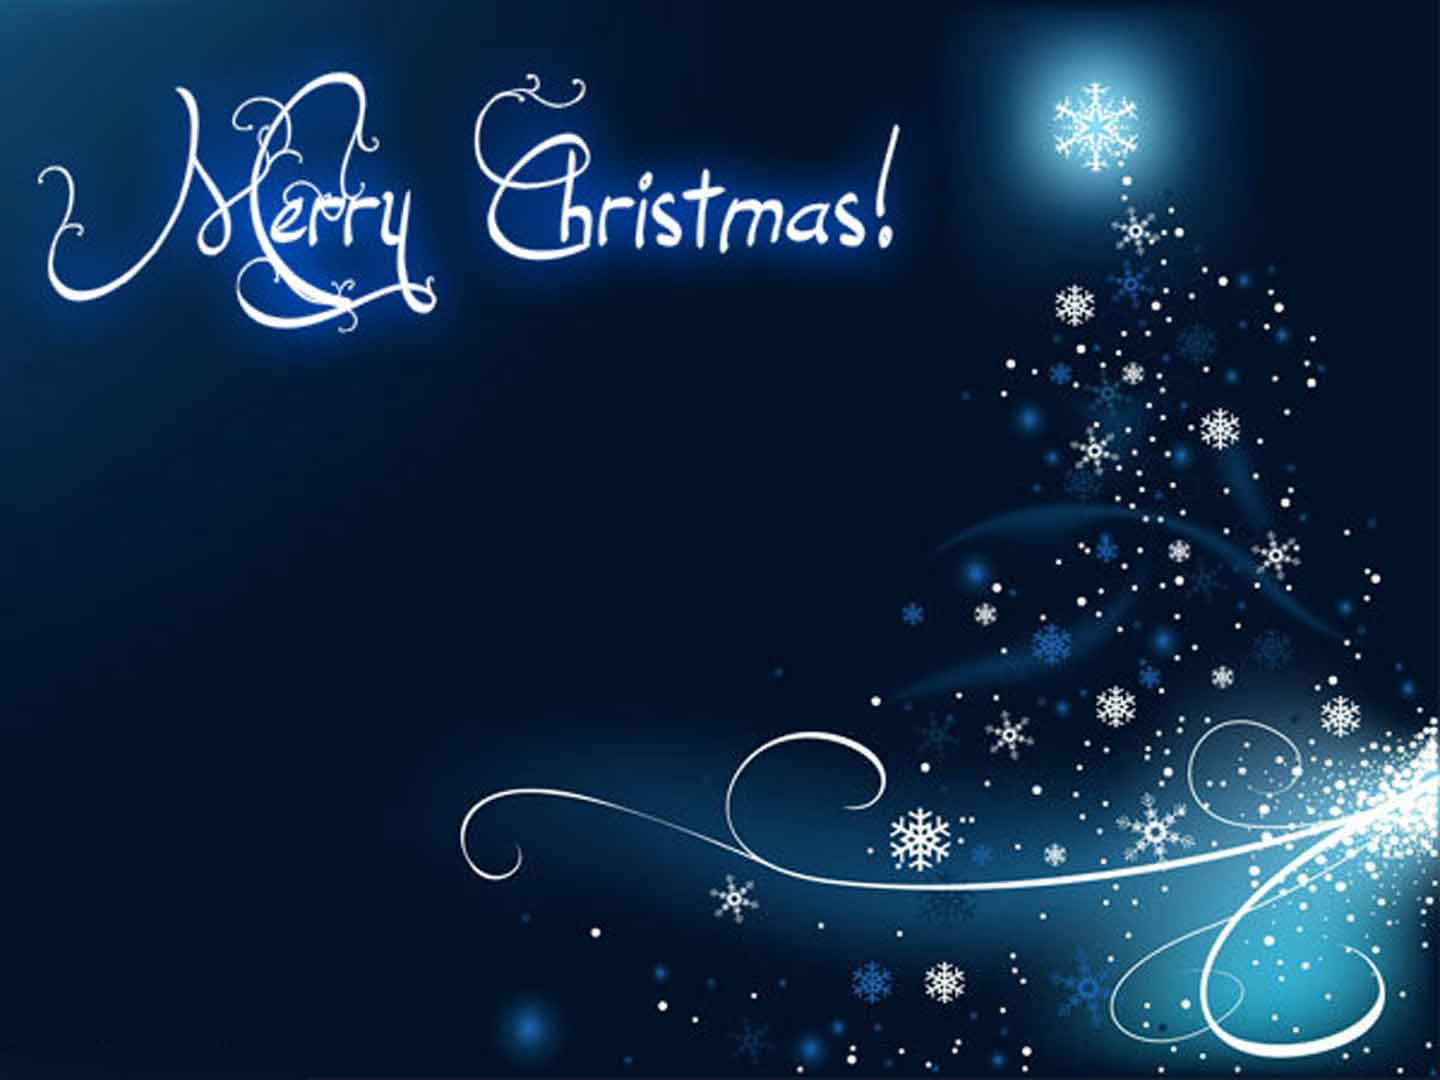 Merry Christmas Background Wallpaper9